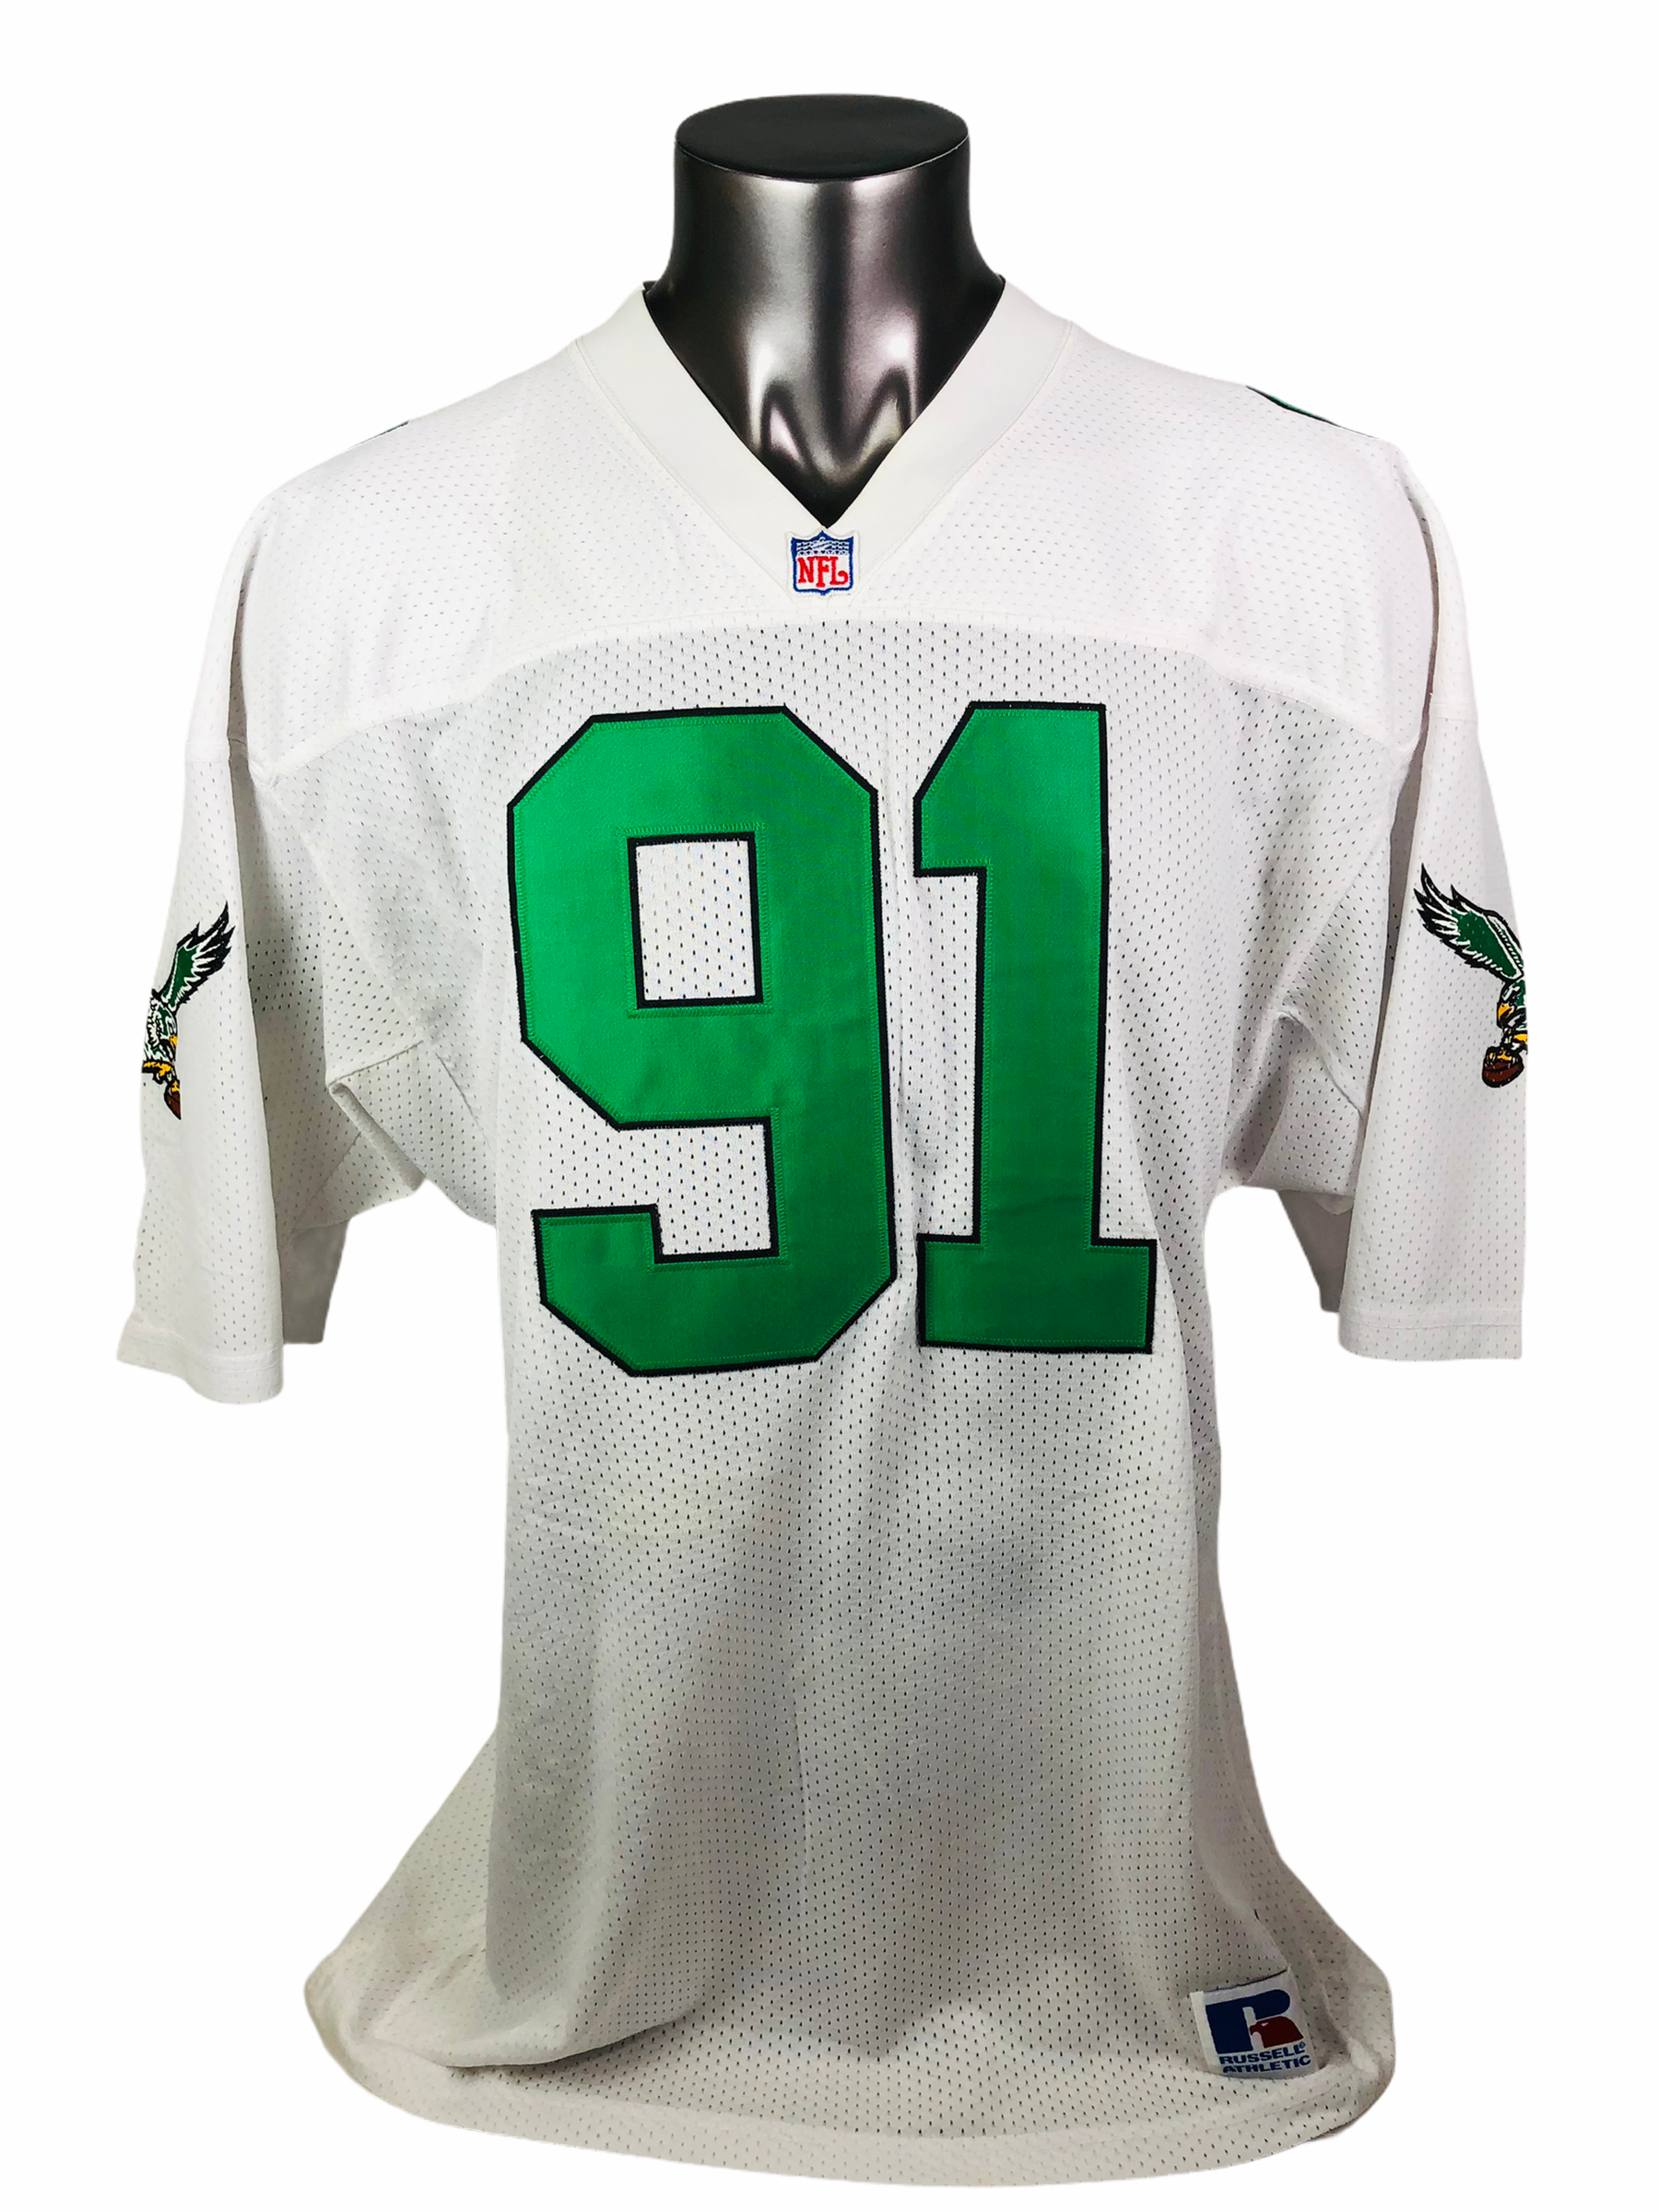 Best Philadelphia Eagles gifts: Jerseys, hats and more